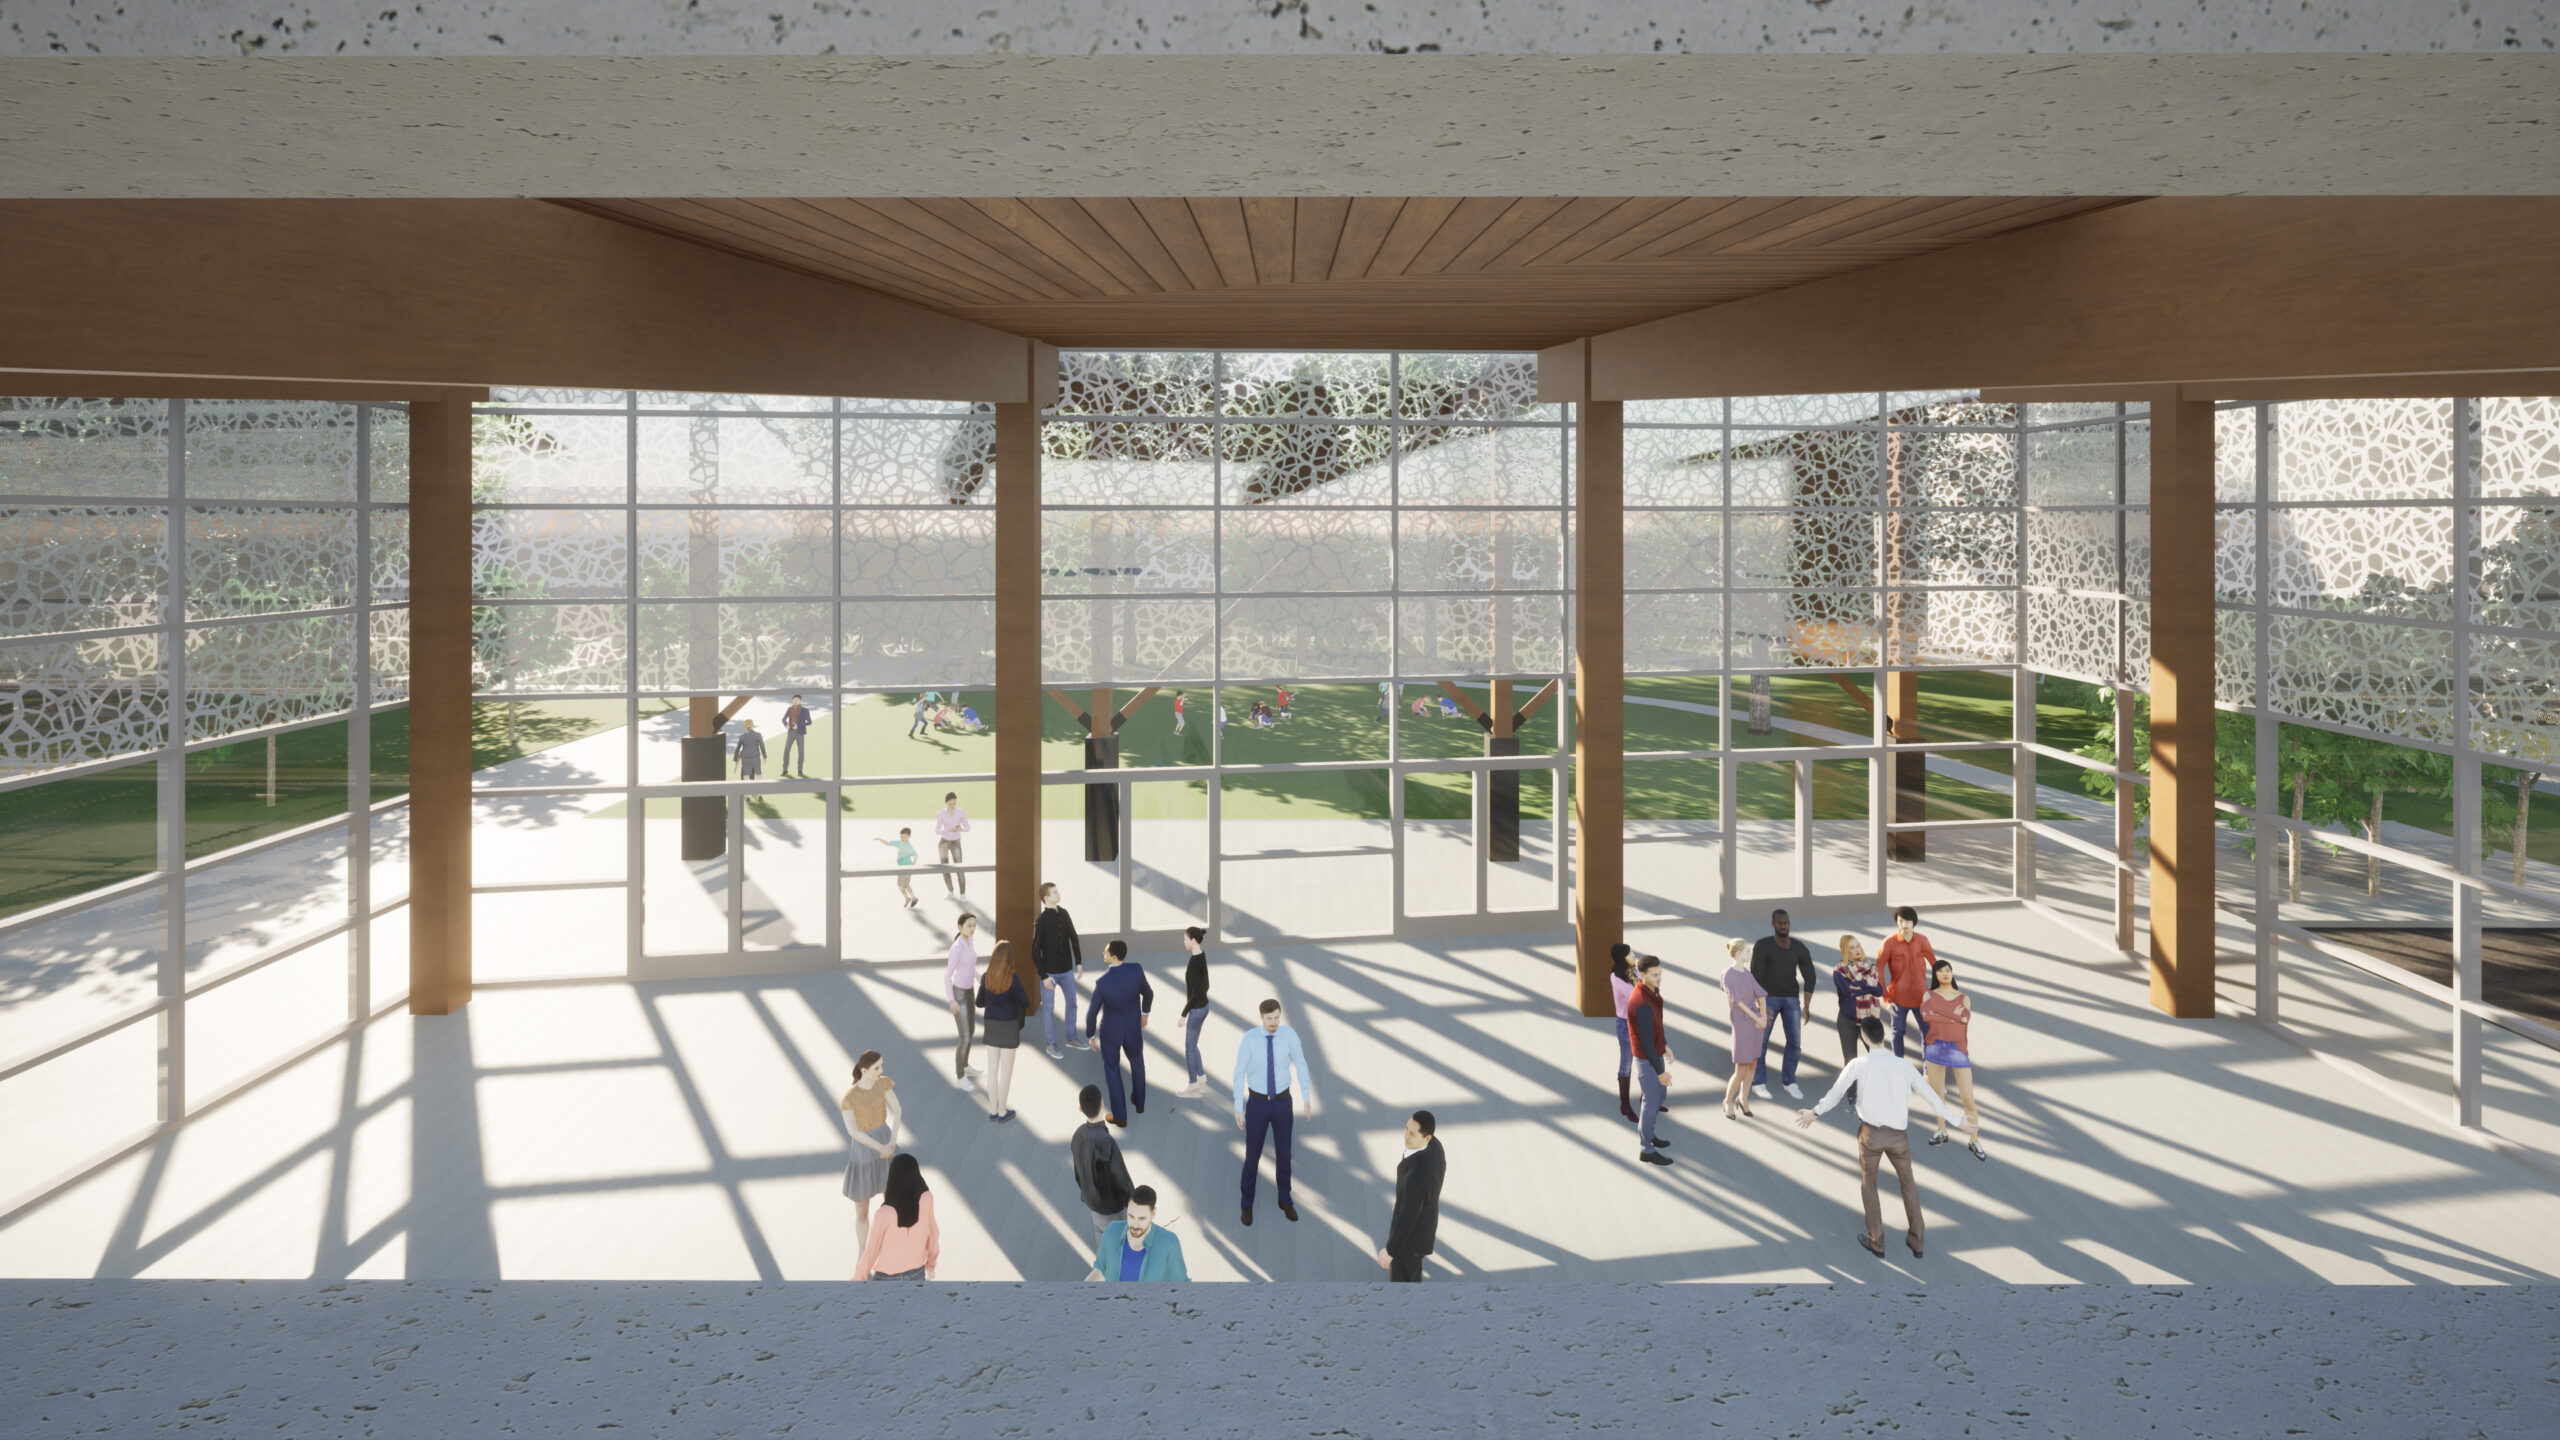 Interior visualization of Community building, designed by nba architects. Project is focused on sustainable construction and includes traditional exposed mass-timber, post & beam construction, and a low pitch long-span roof.